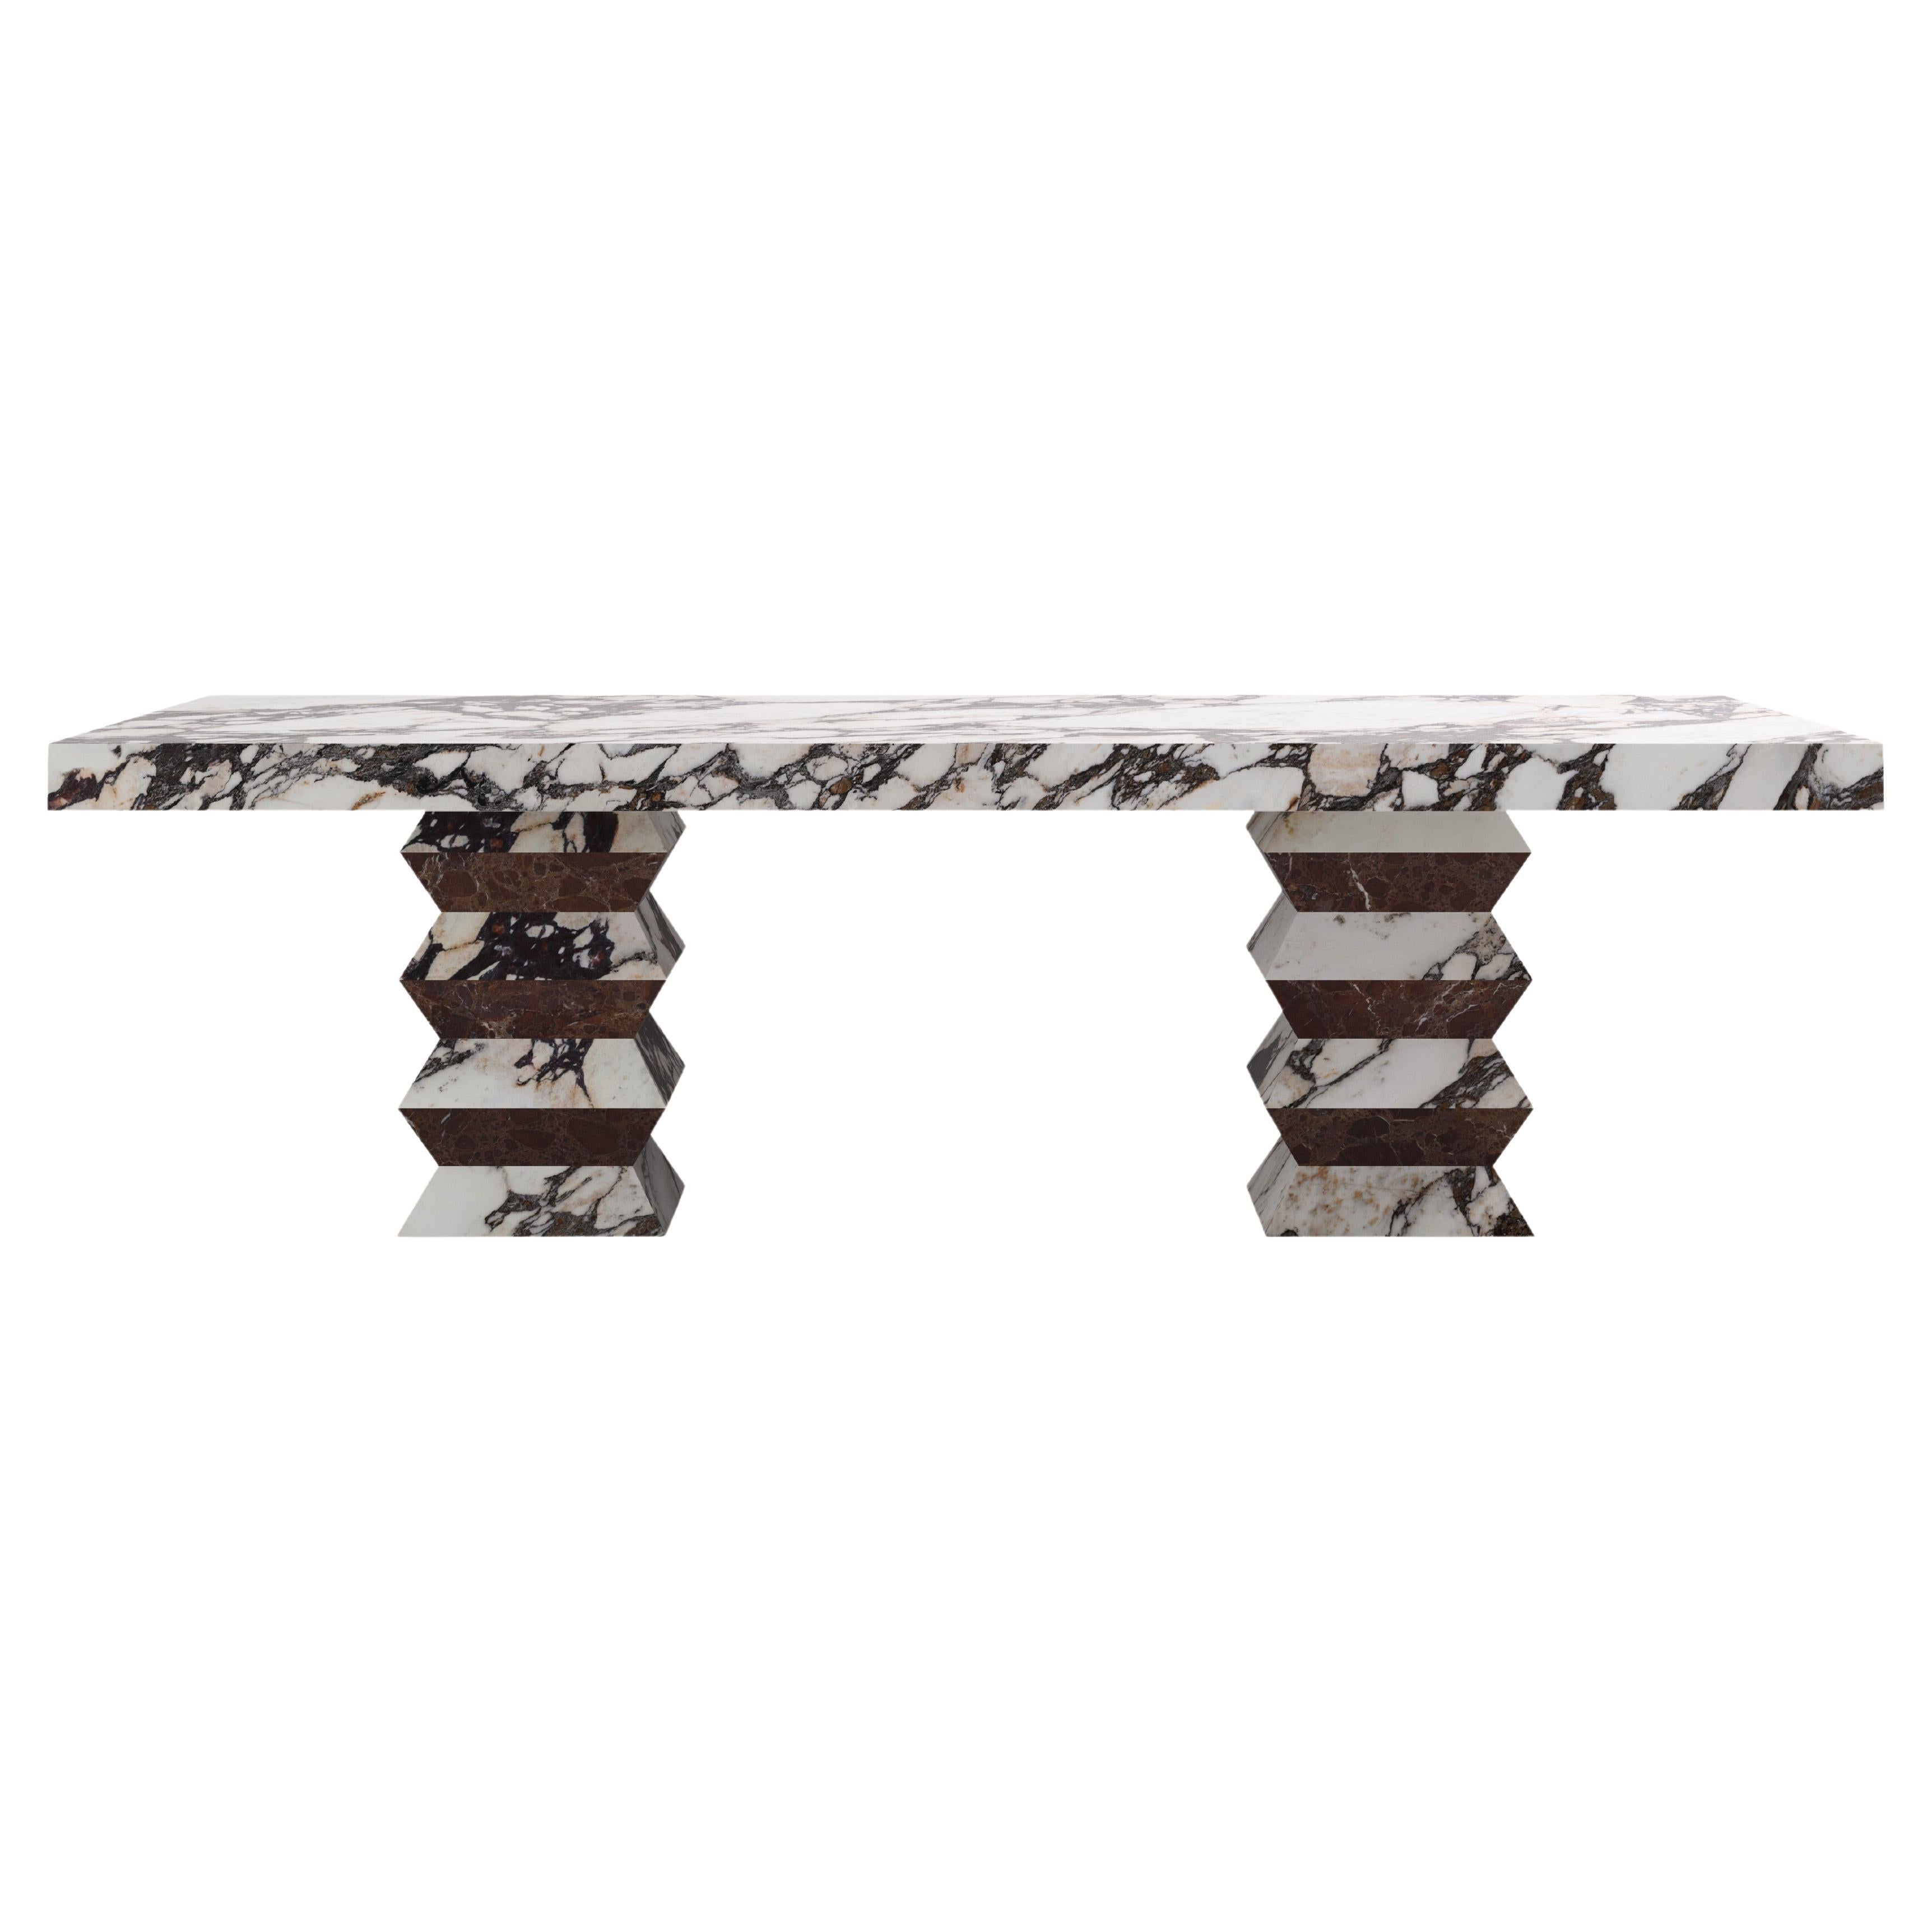 FORM(LA) Grinza Rectangle Dining Table 84"L x 42"W x 32"H Calacatta Viola Marble For Sale